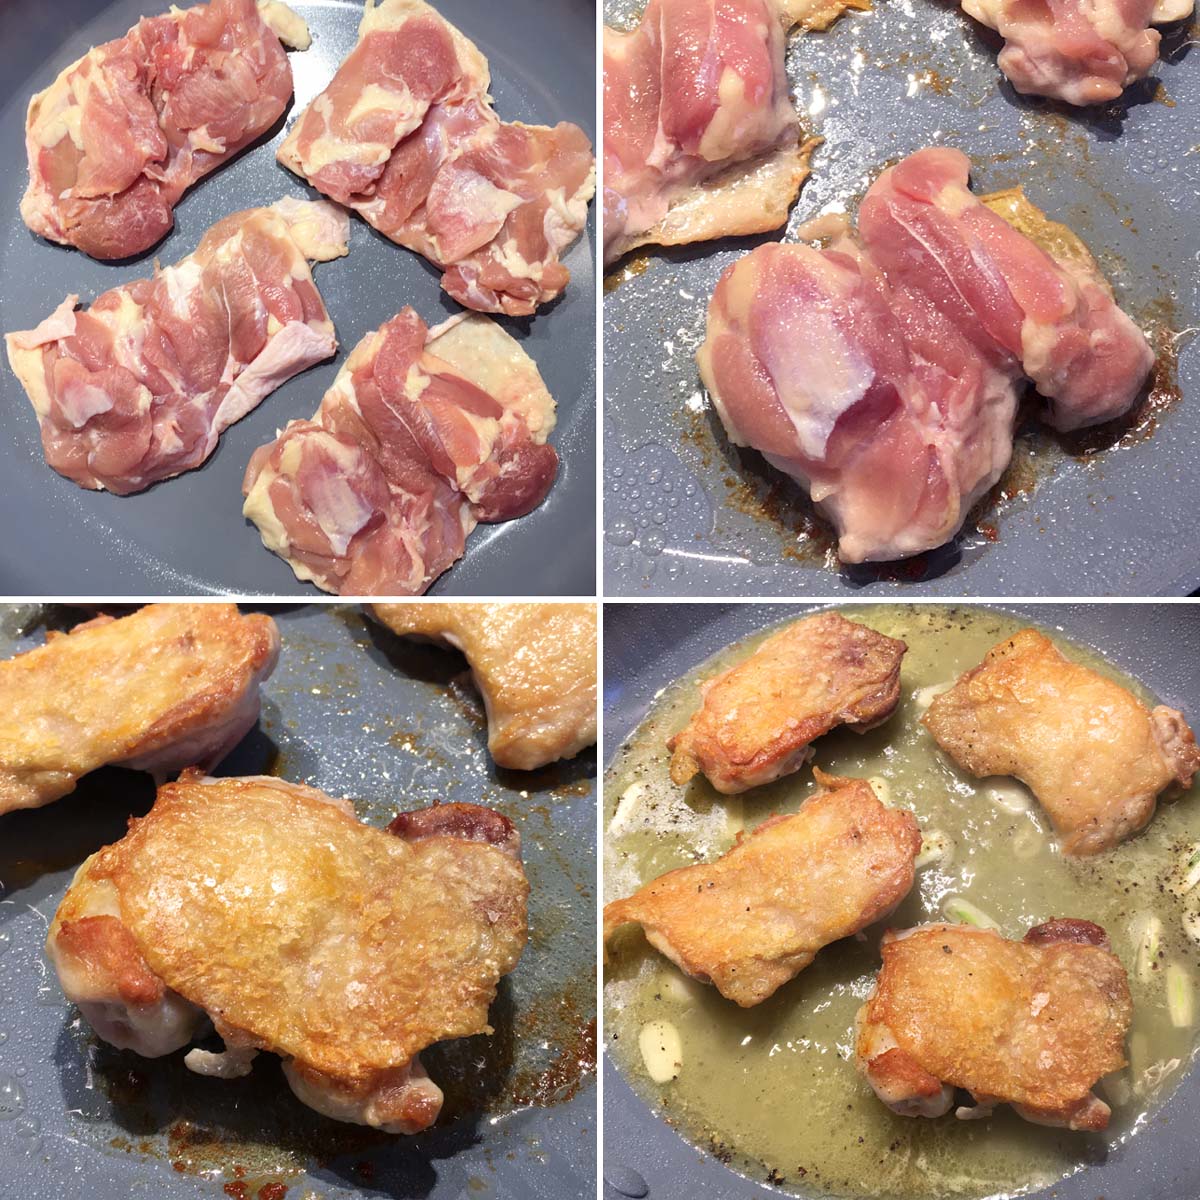 Four raw chicken thighs being cooked in a grey skillet.